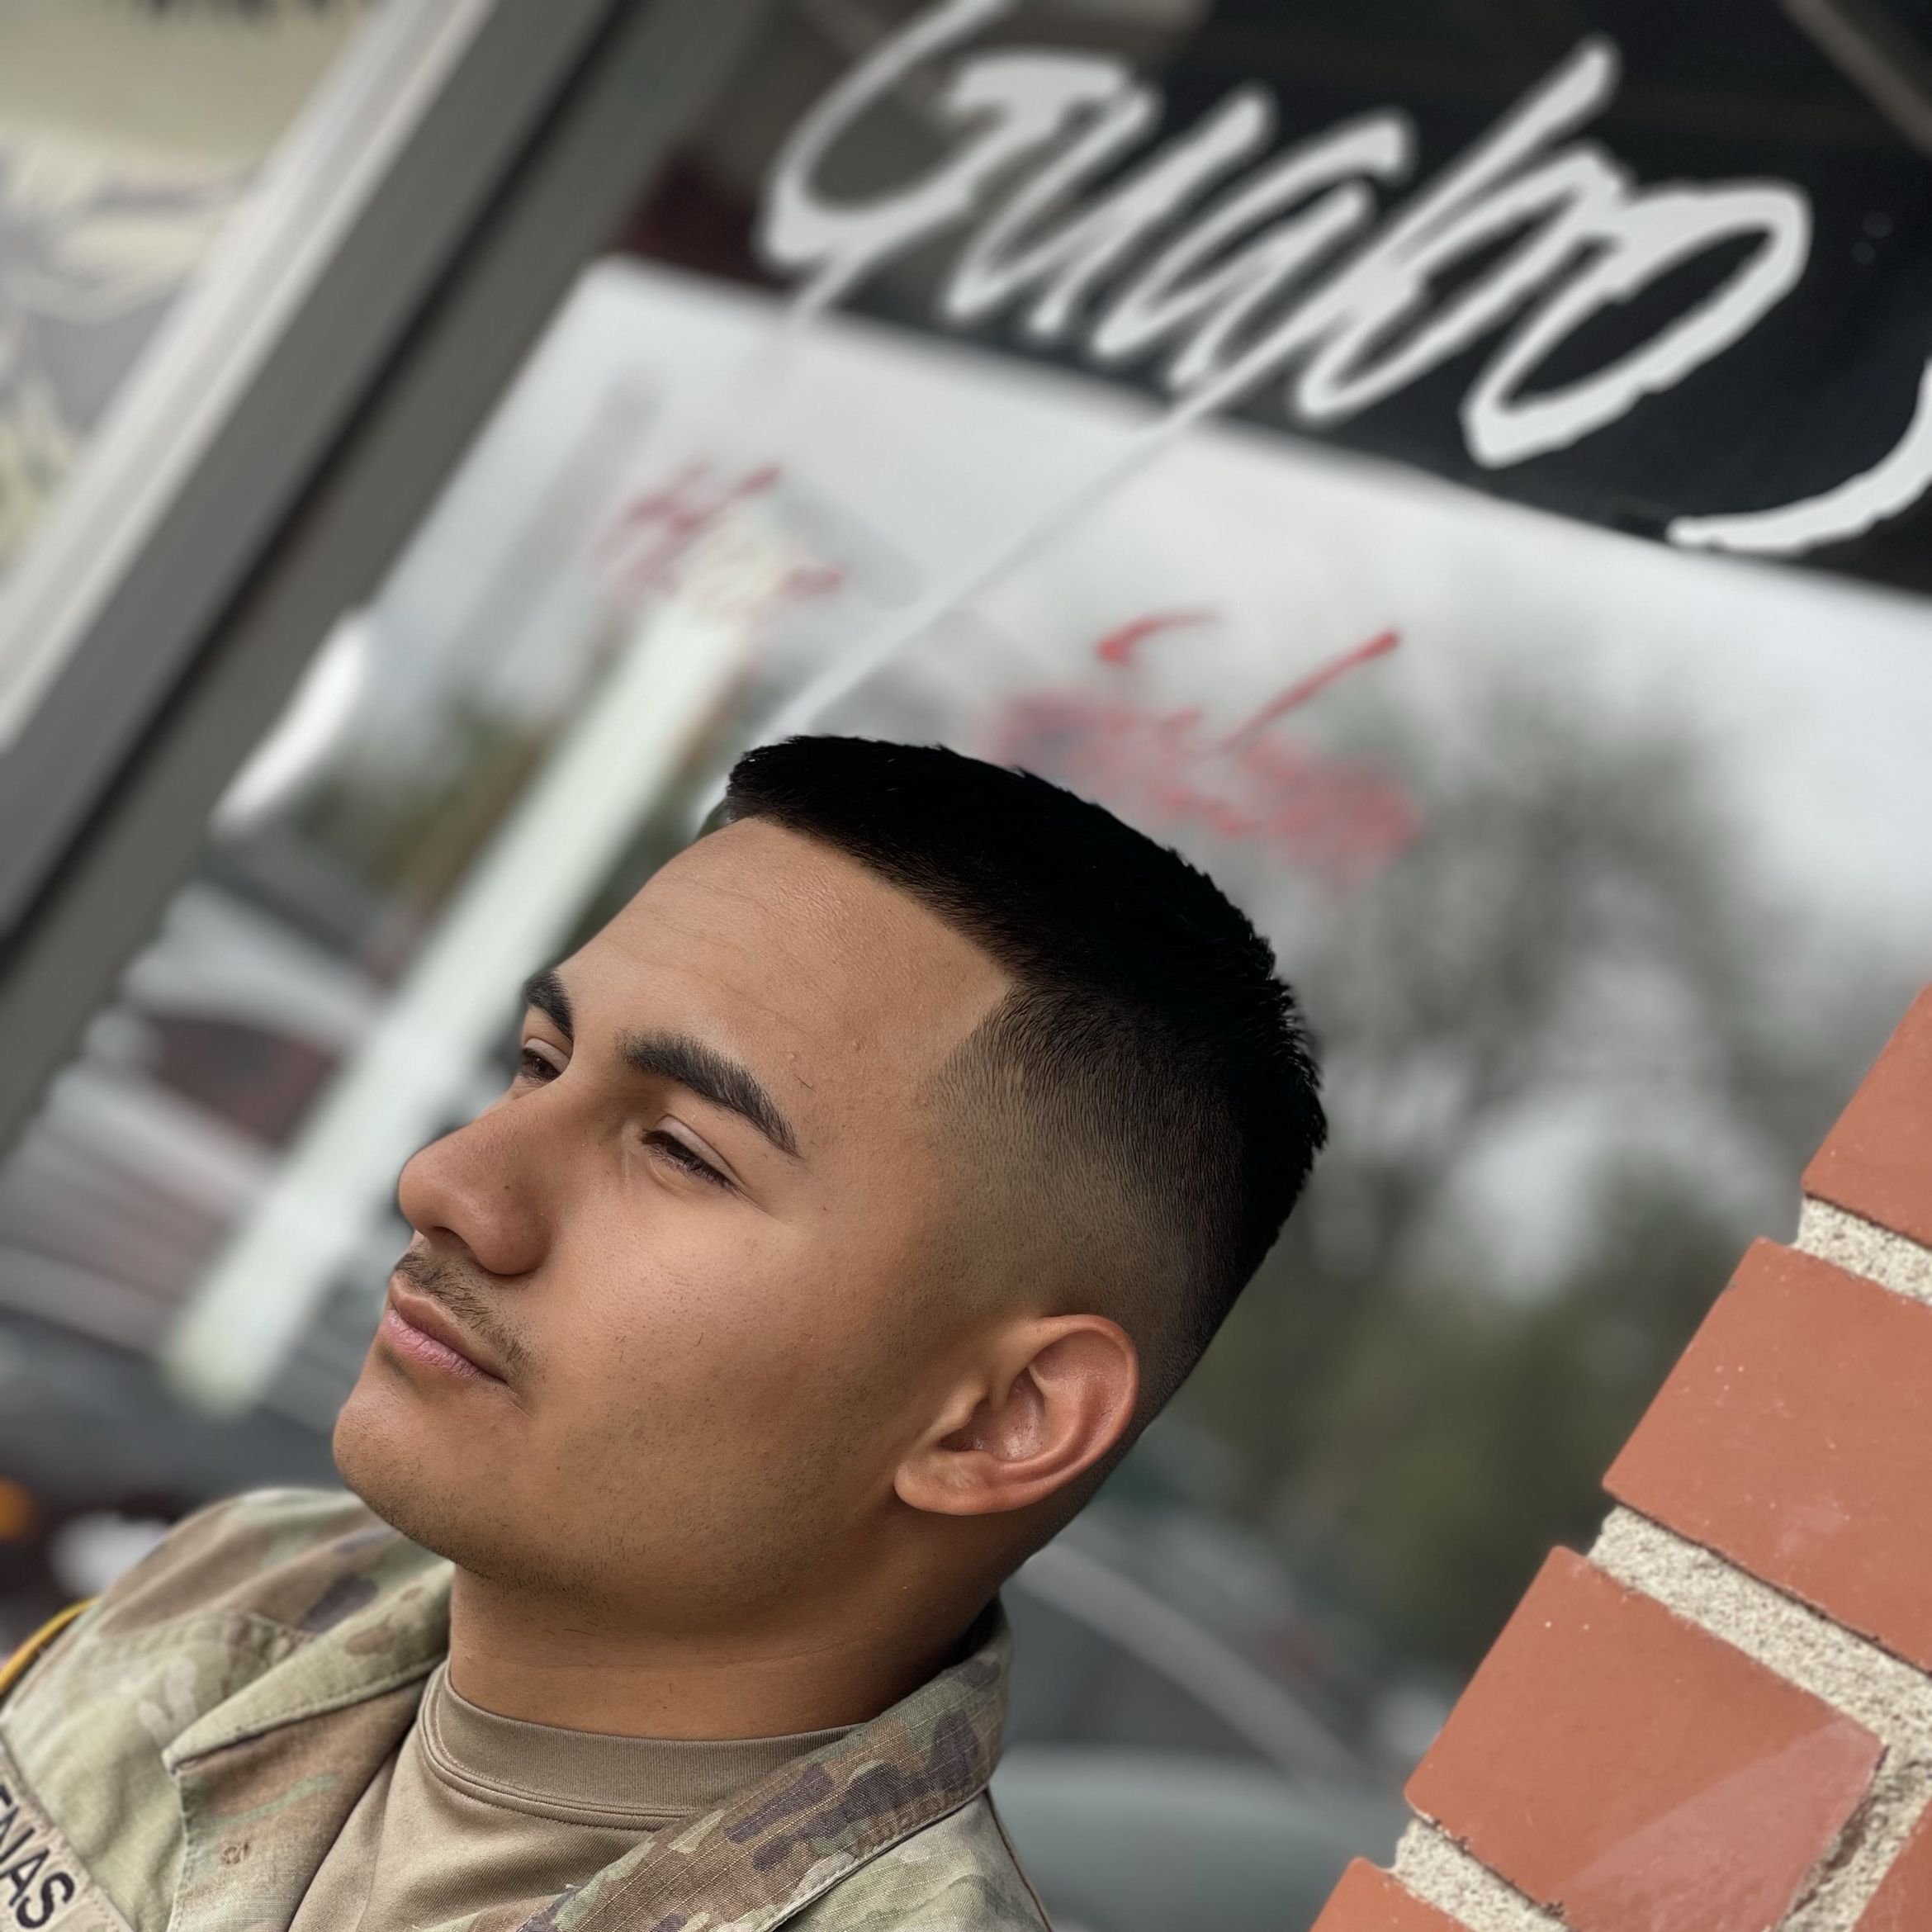 Almighty Guapo Barbershop, 910 B Grant Avenue, Junction City, 66441